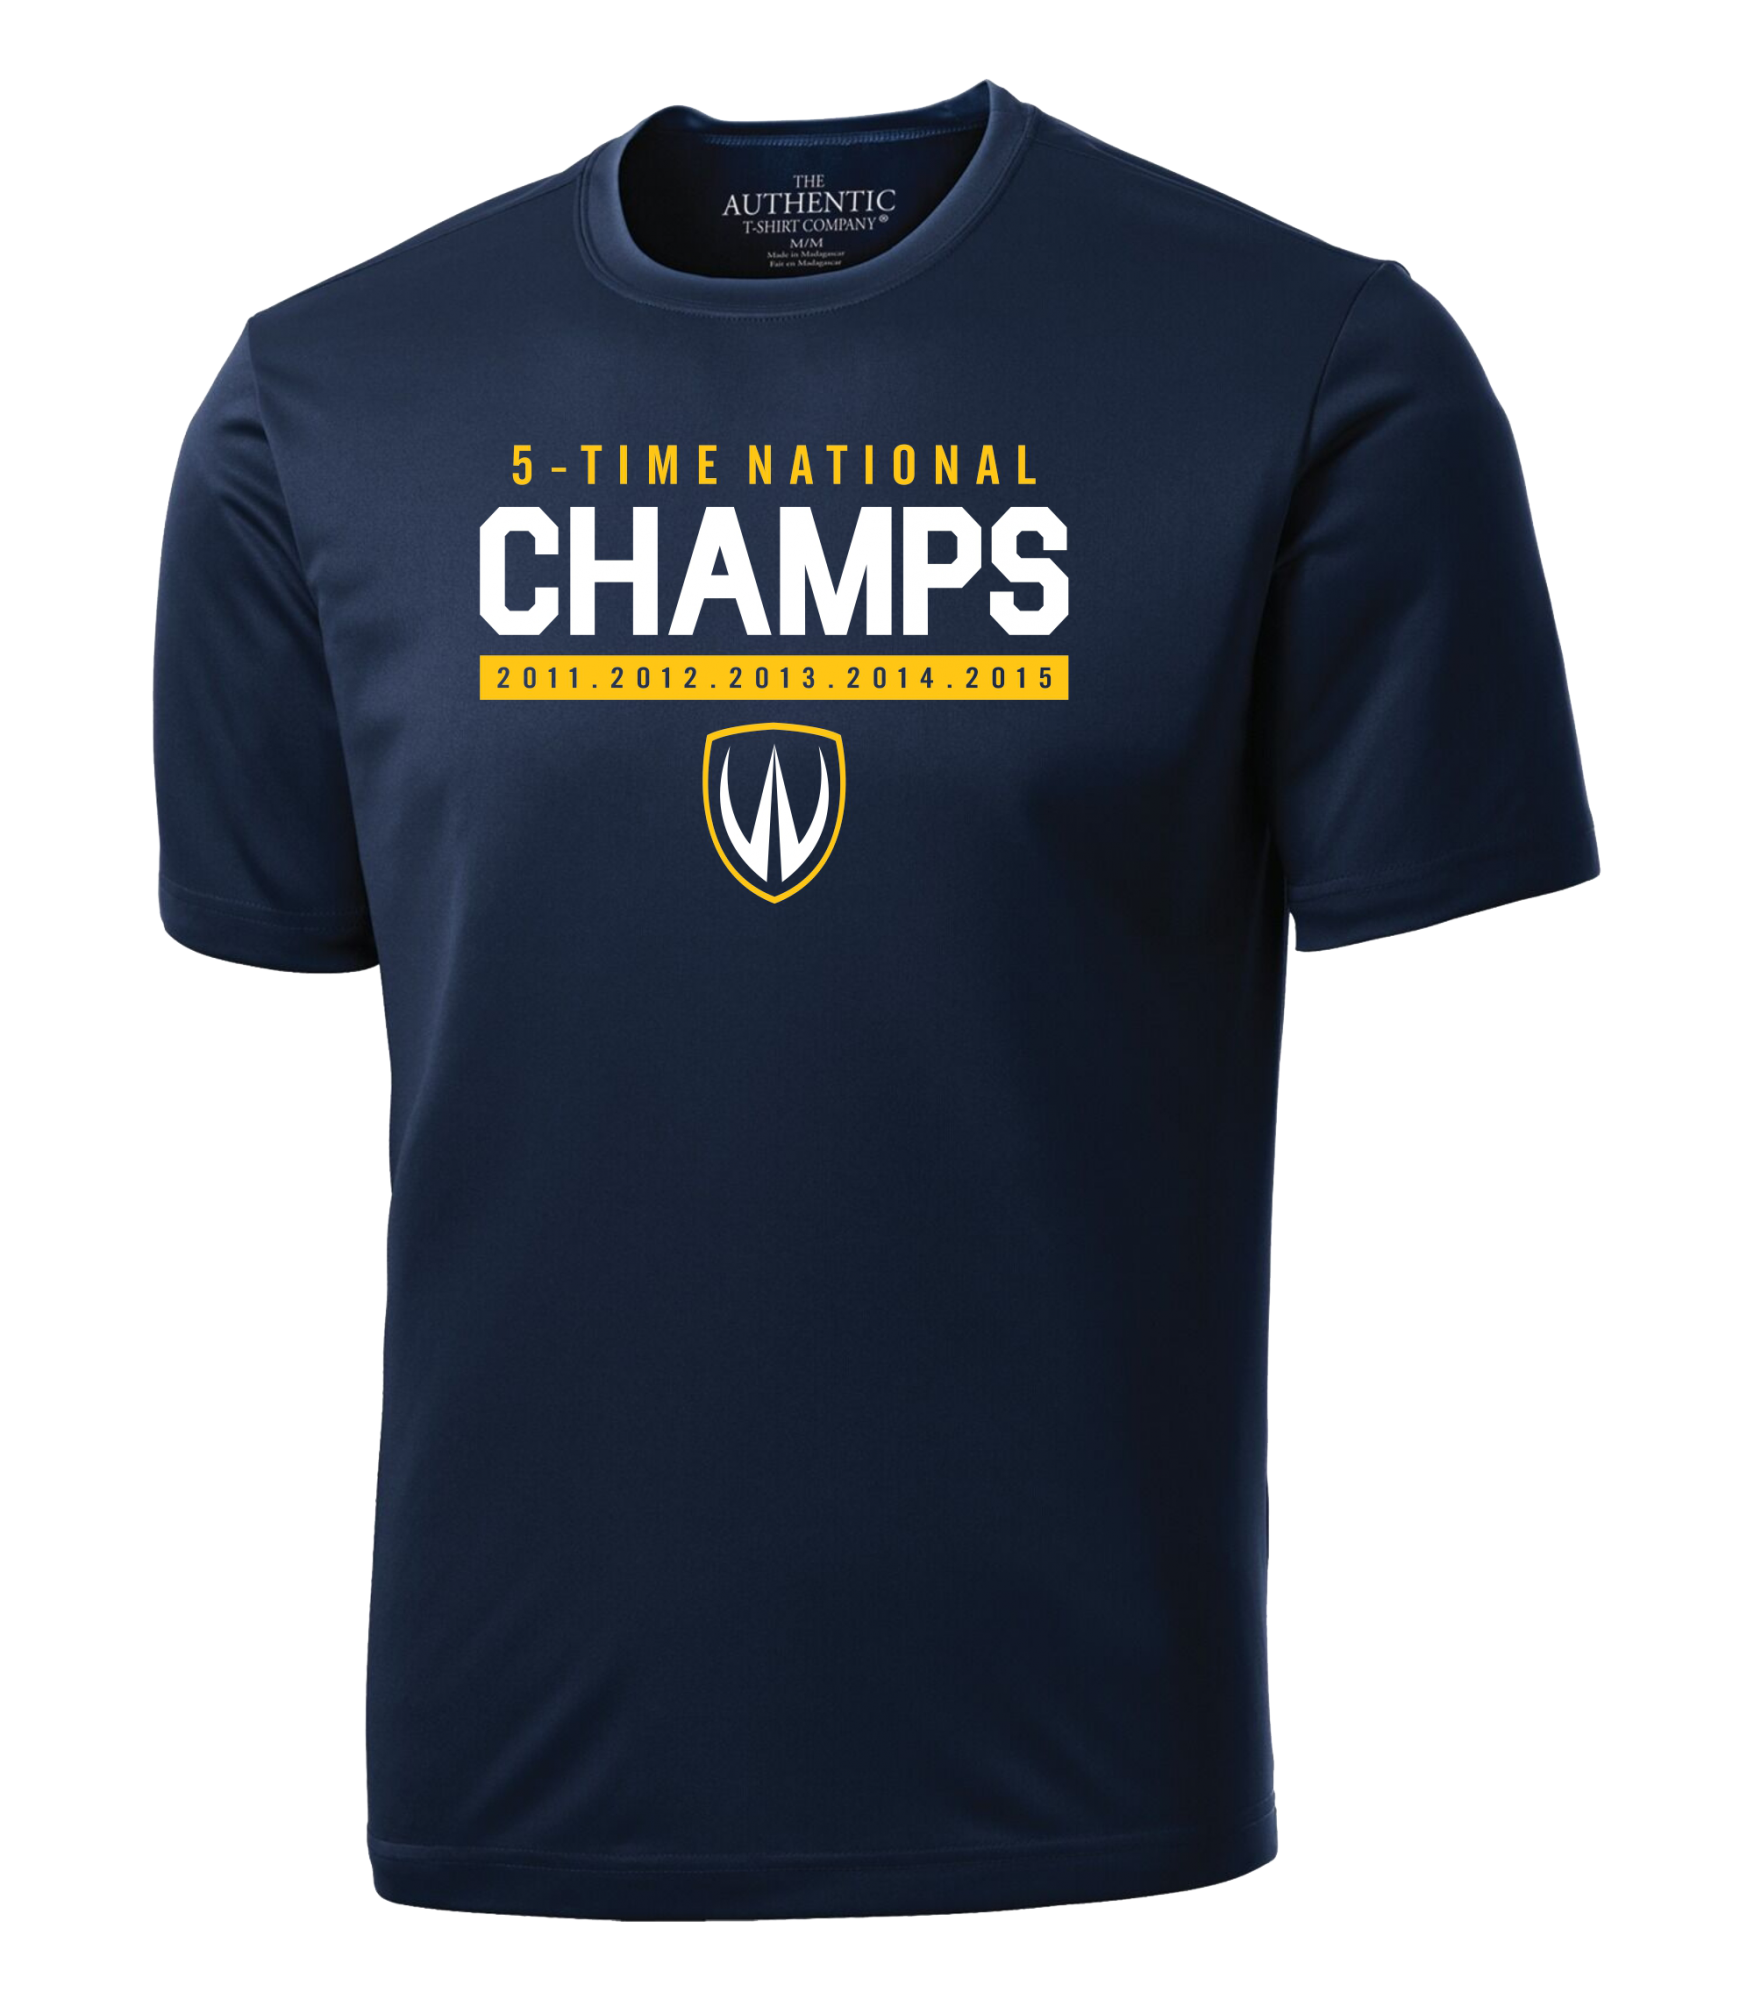 5 times Champs T-Shirt (dry fit) Preview